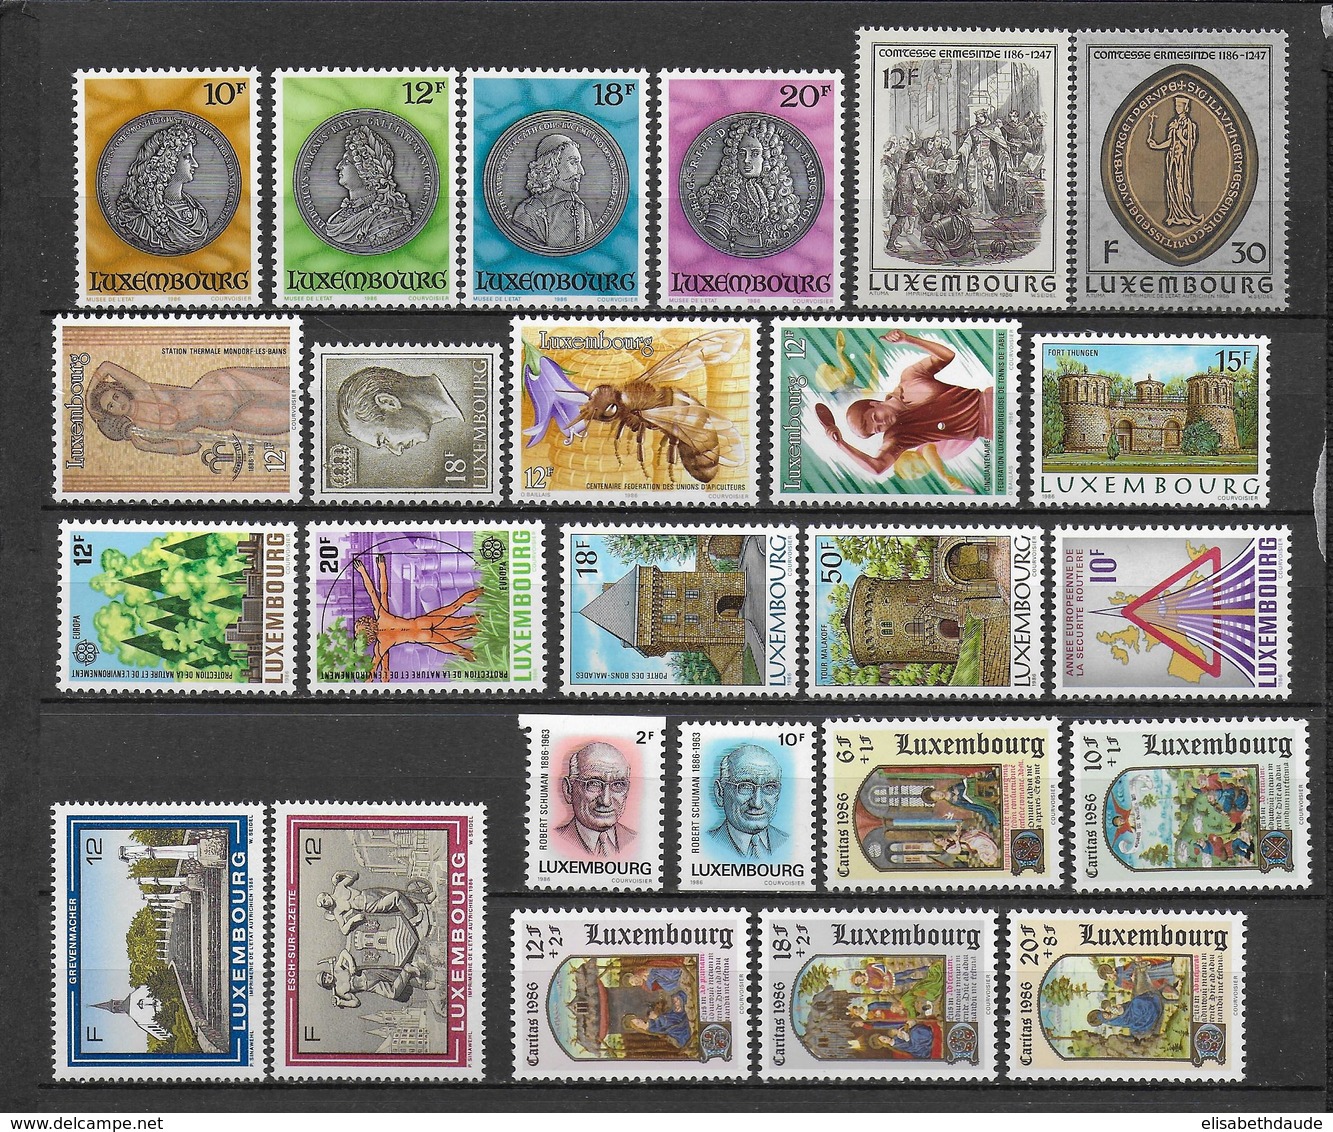 LUXEMBOURG - ANNEE COMPLETE 1986 ** MNH - - Años Completos